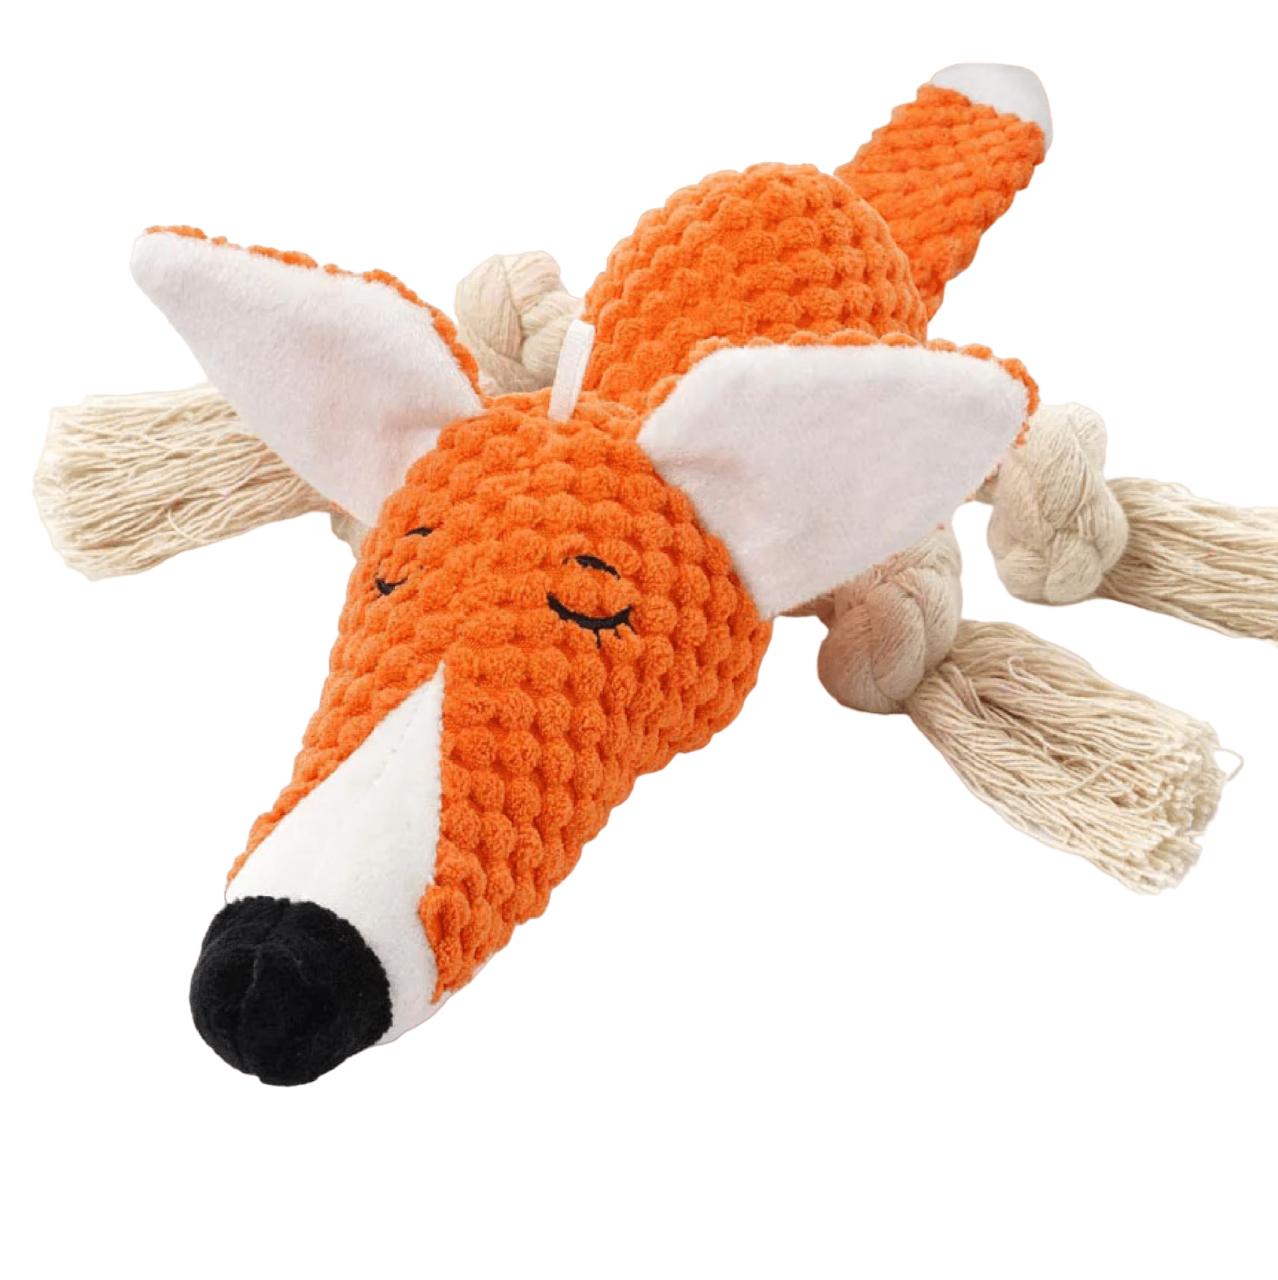 For Dogs - Fox Plush Rope Dog Toy